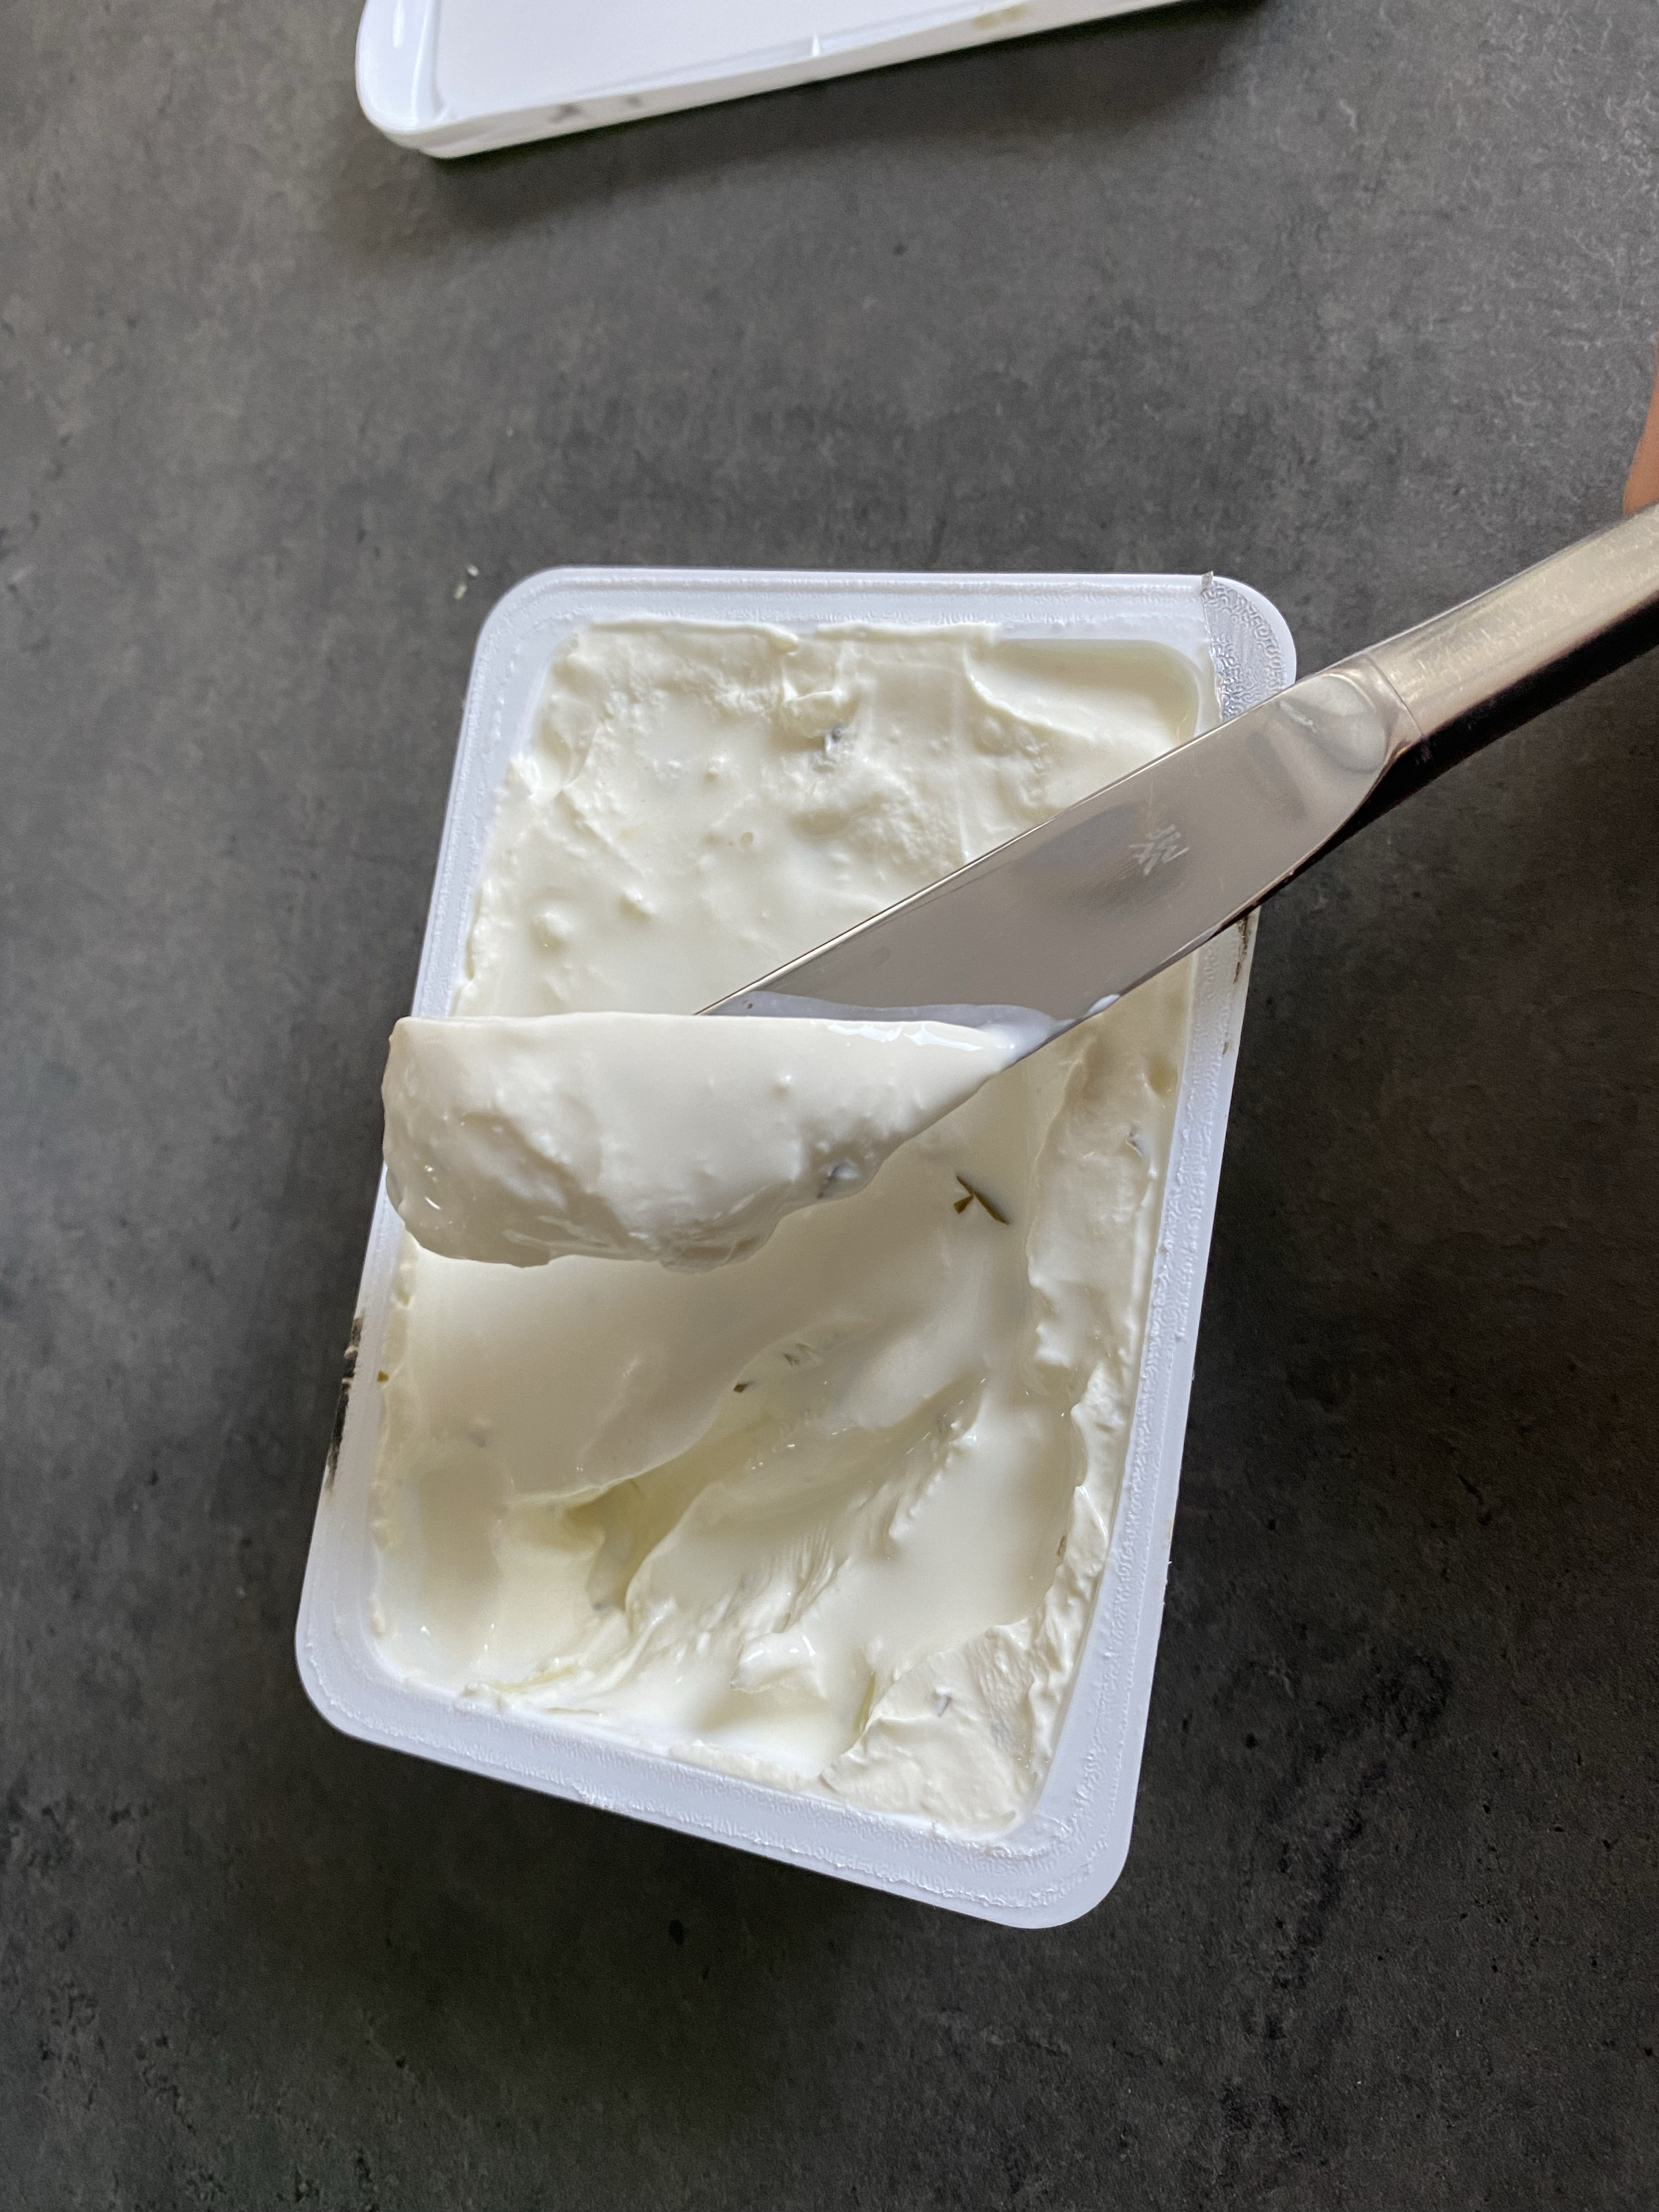 Cream cheese in a container